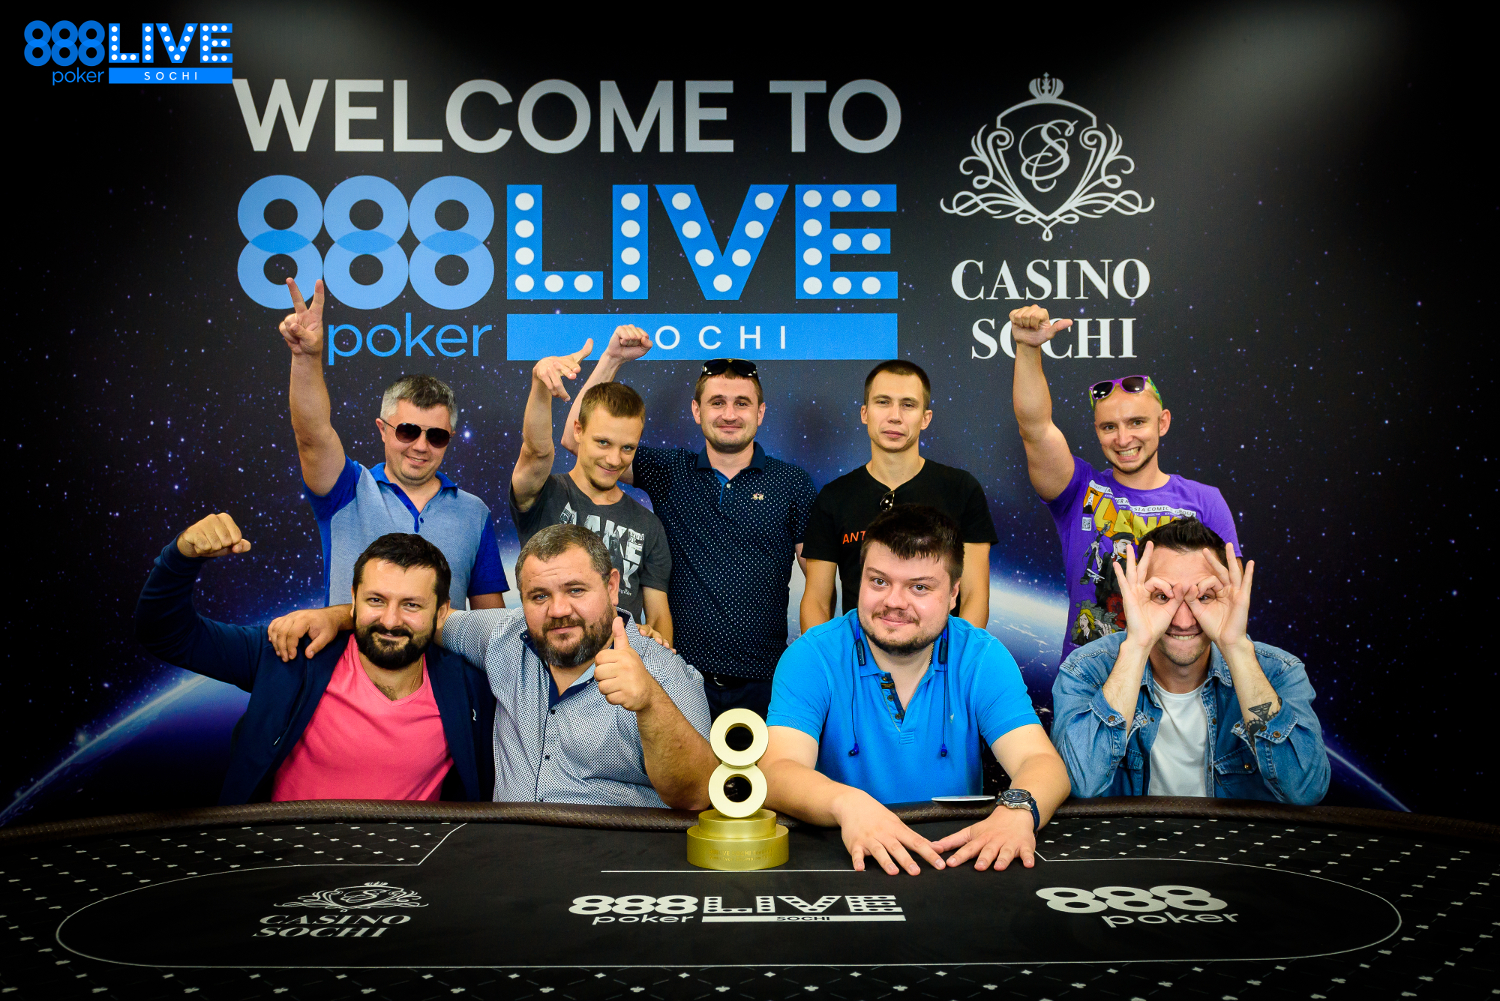 It took four hours of play to get down to a final table of nine - 888pokerLIVESochi